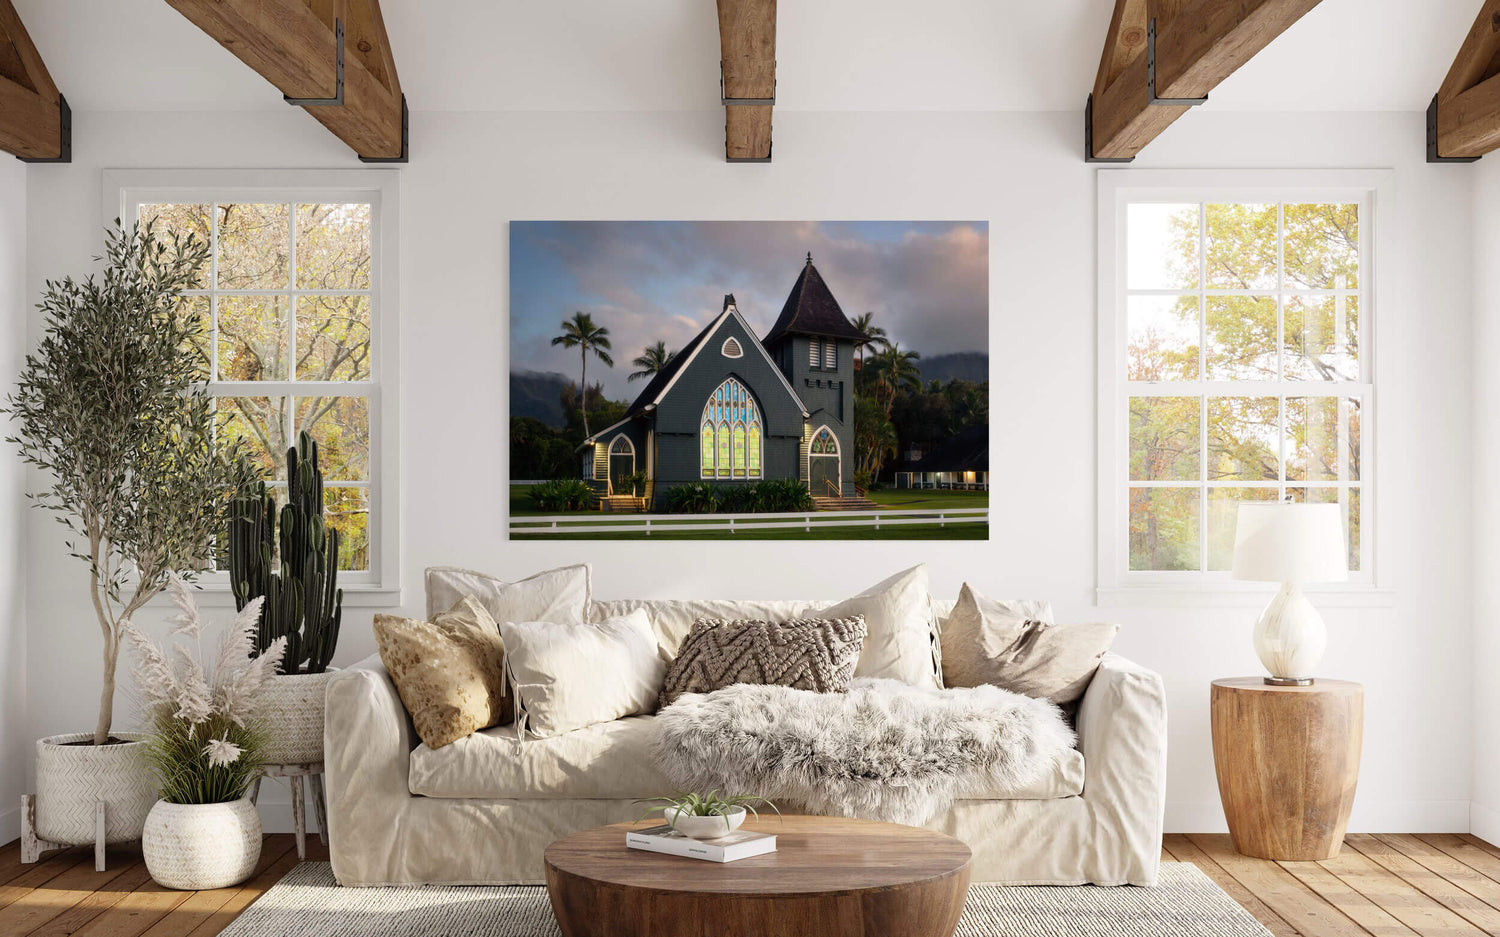 A picture of the church in Hanalei on Kauai hangs in a living room.